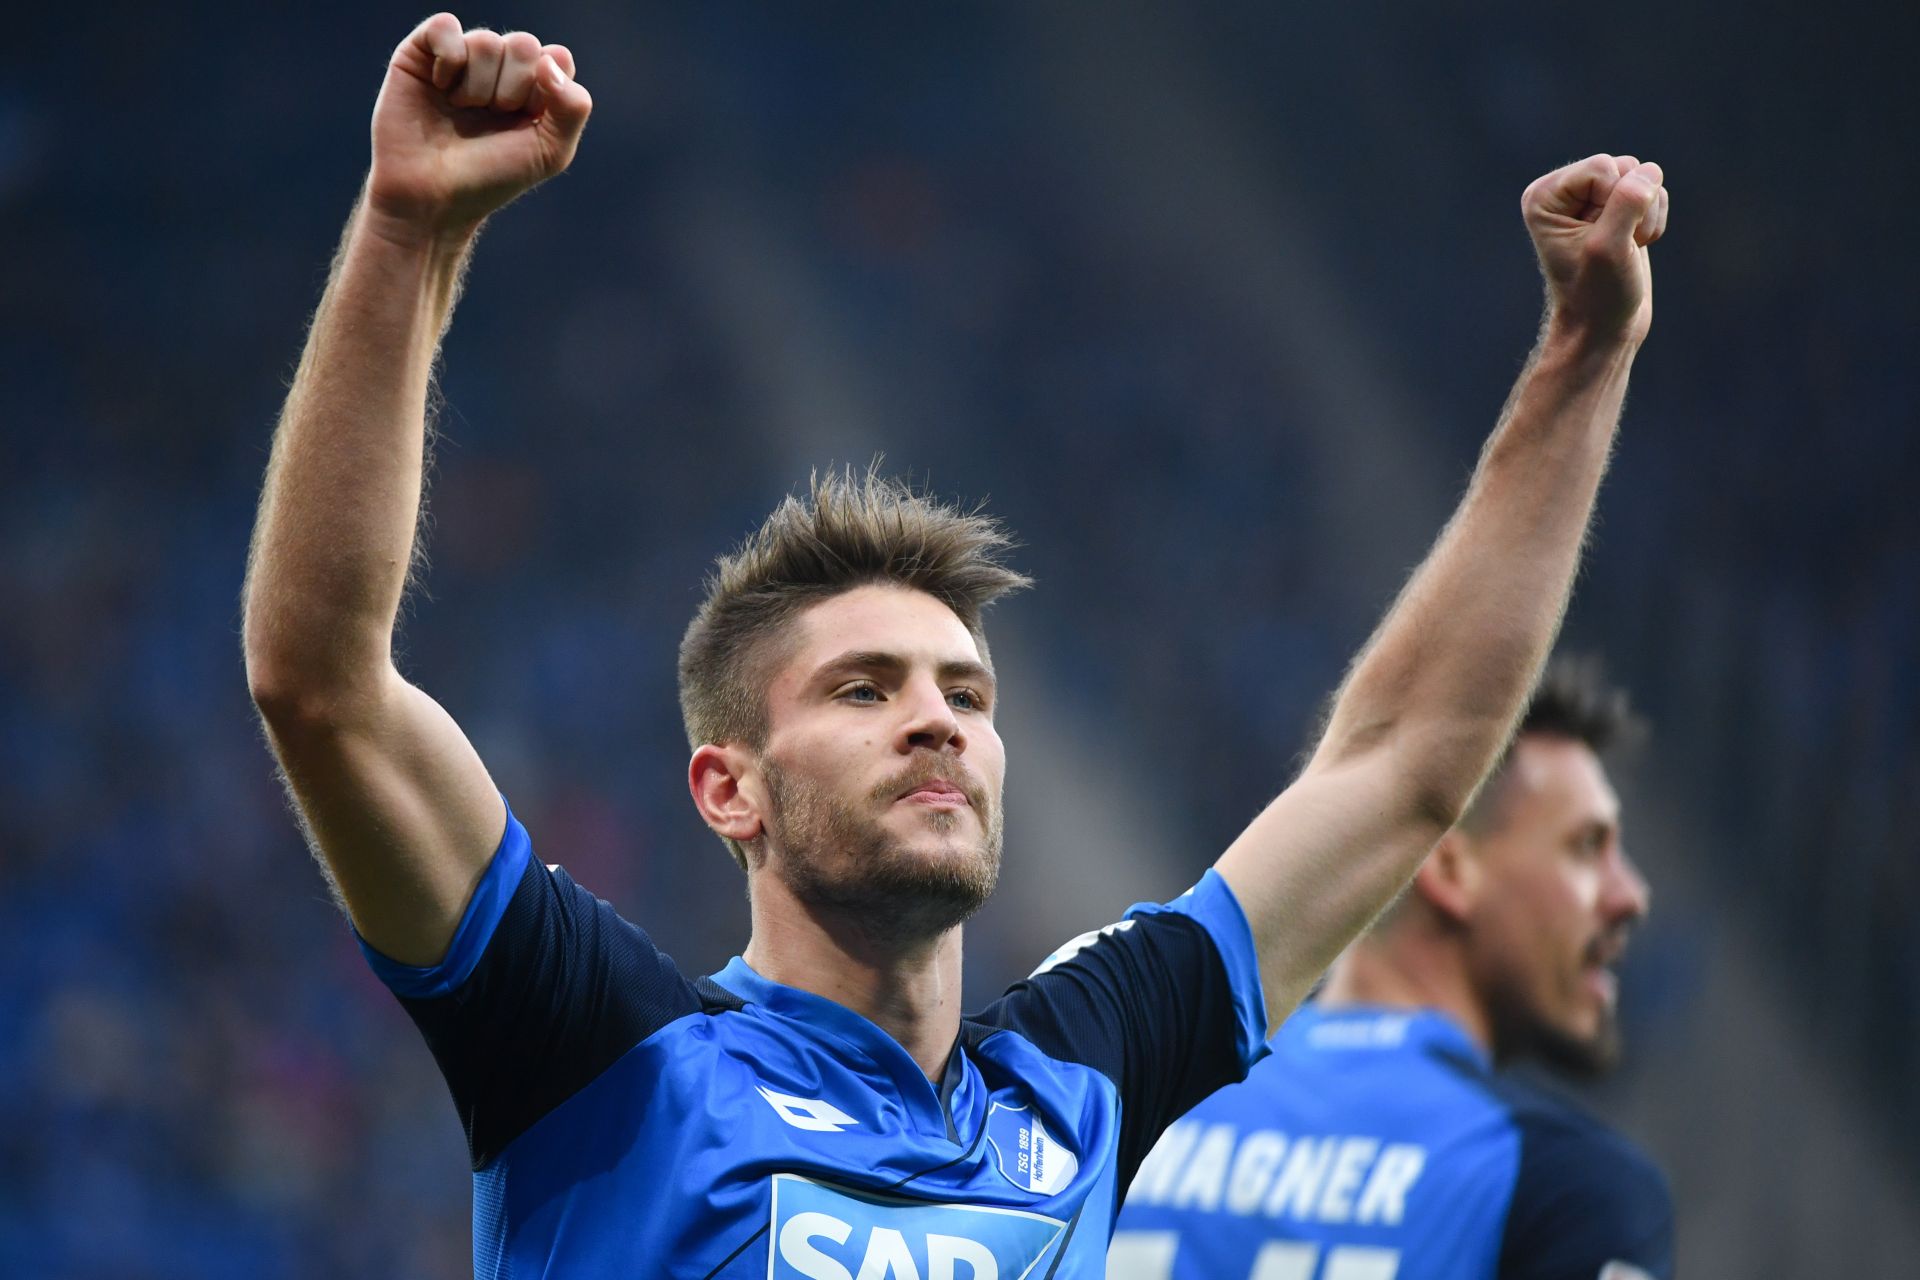 Hoffenheim's Andrej Kramaric celebrates his 1-0 goal during the German Bundesliga soccer match between 1899 Hoffenheim and Darmstadt 98 in the Rhein Neckar Arena in Sinsheim, Germany, 18 February 2017.



(EMBARGO CONDITIONS - ATTENTION: Due to the accreditation guidelines, the DFL only permits the publication and utilisation of up to 15 pictures per match on the internet and in online media during the match.) Photo: Uwe Anspach/dpa